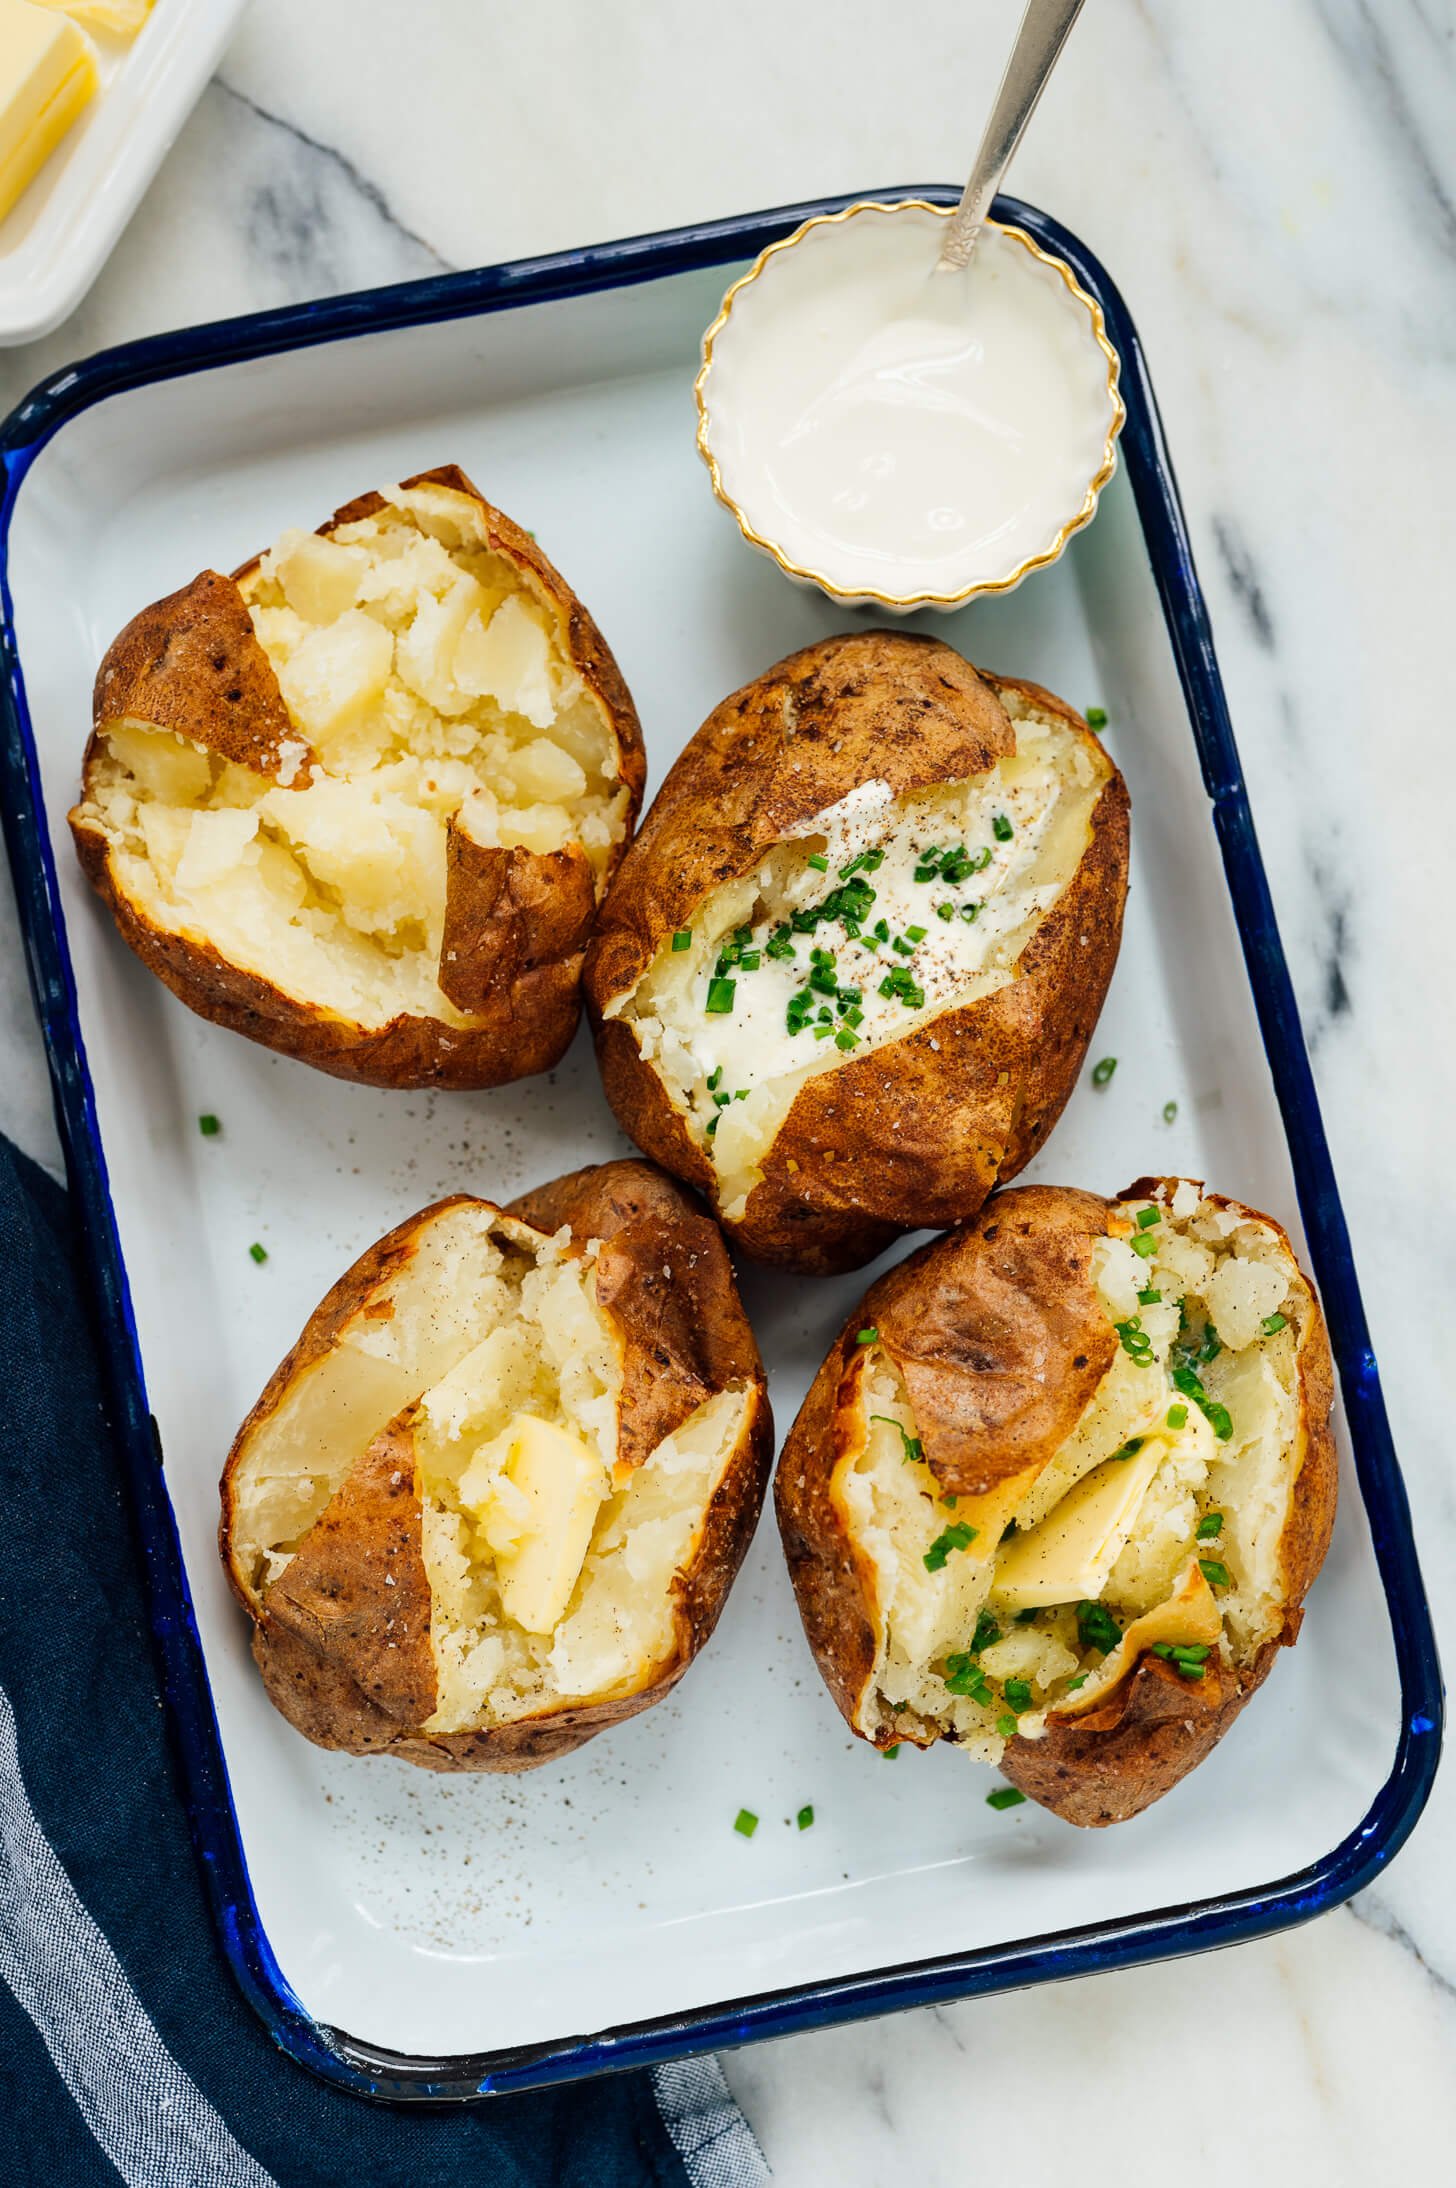 Baked Potato: Tips, Serving Ideas, and Dietary Options